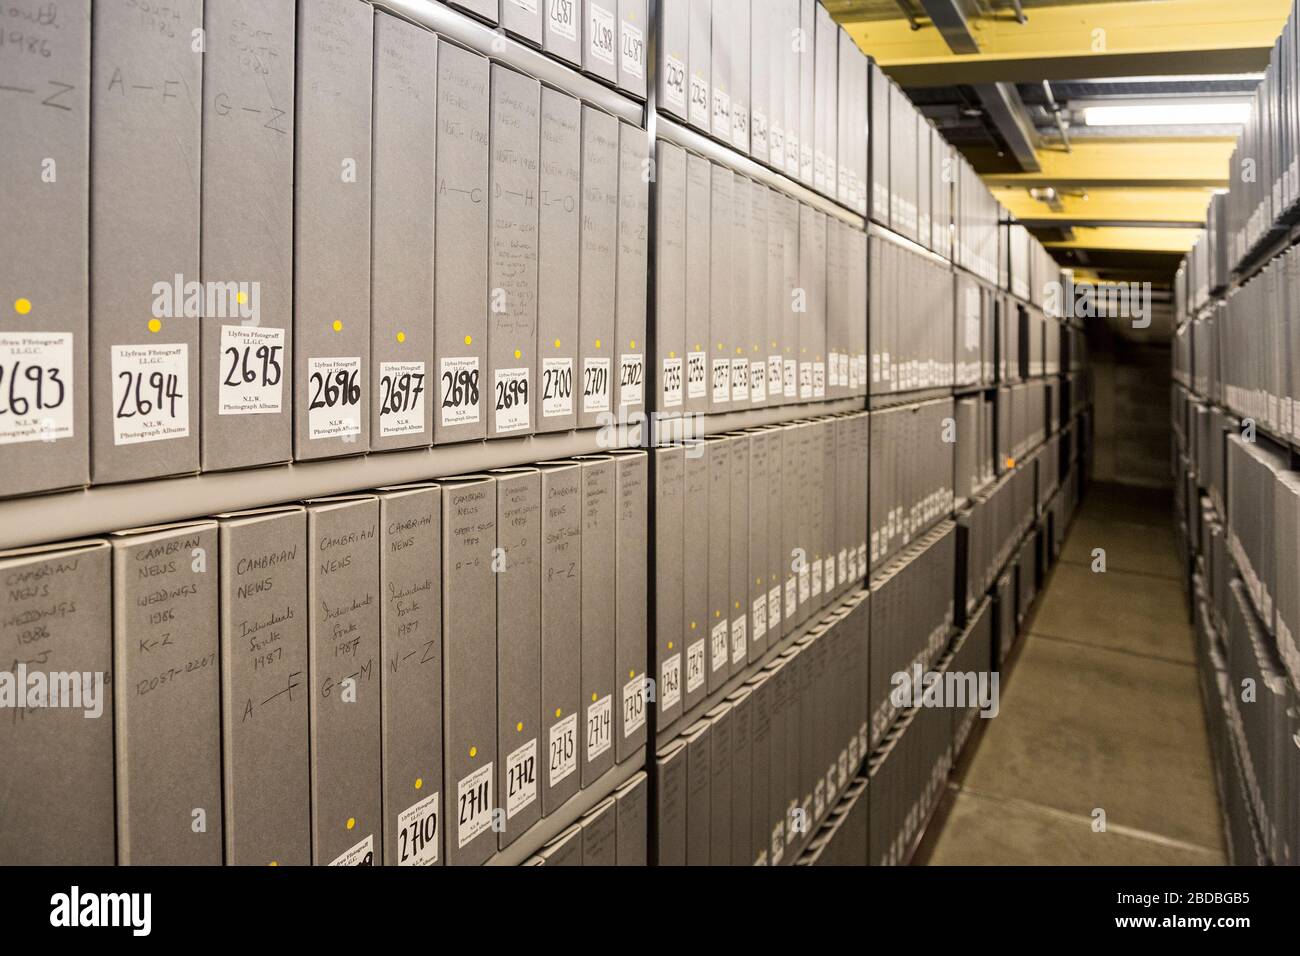 Storage shelves with archival boxes, National Library of Wales, Aberystwyth, Wales, UK Stock Photo